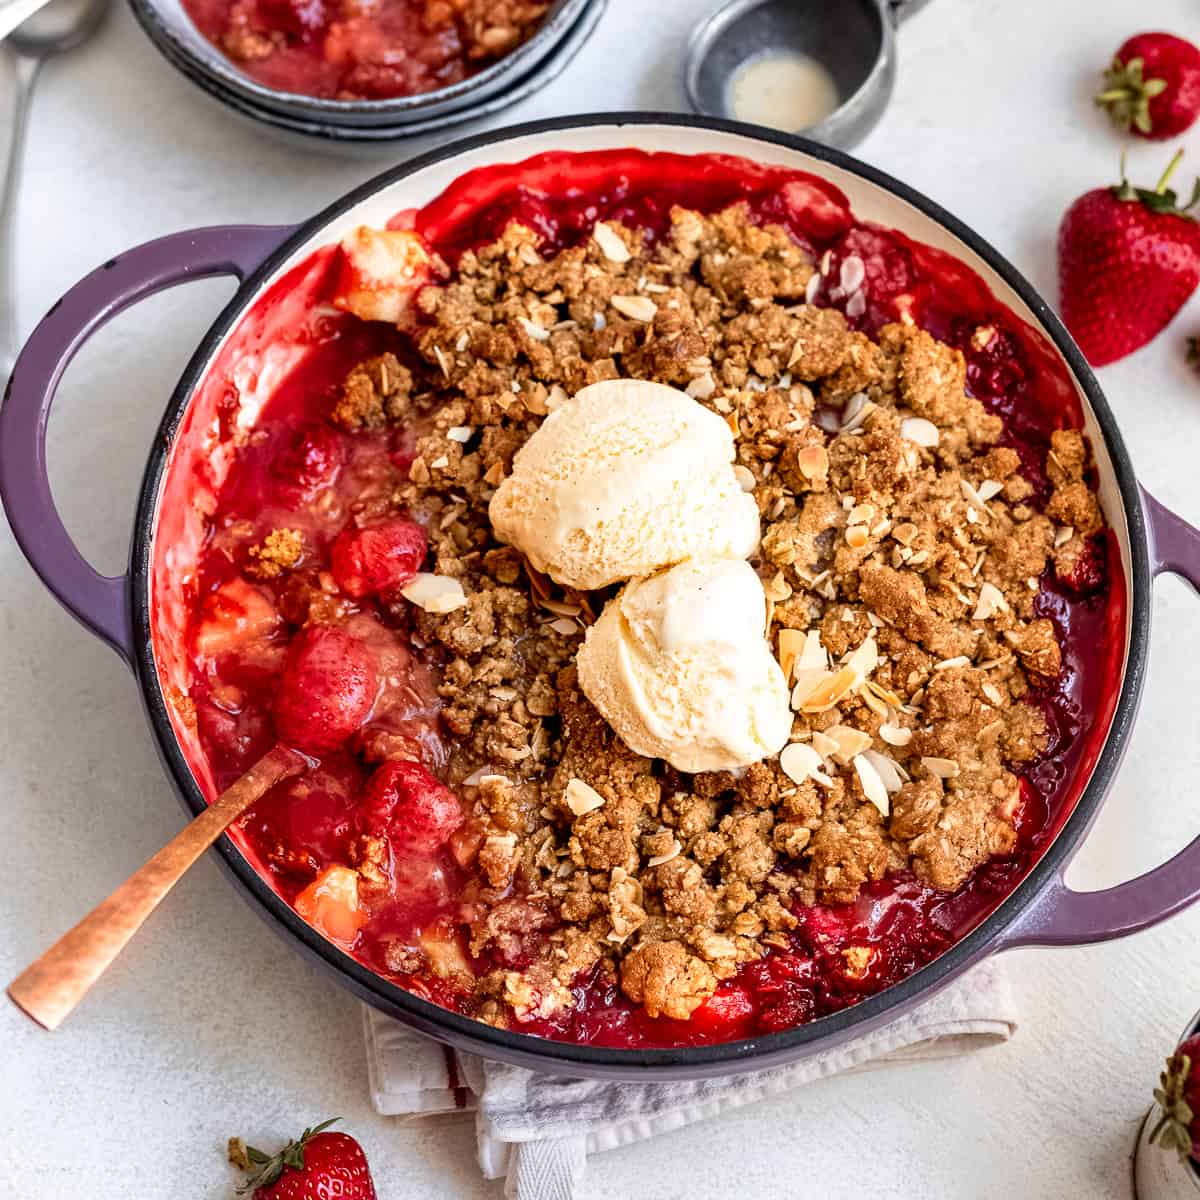 Apple and strawberry crumble in a casserole dish.